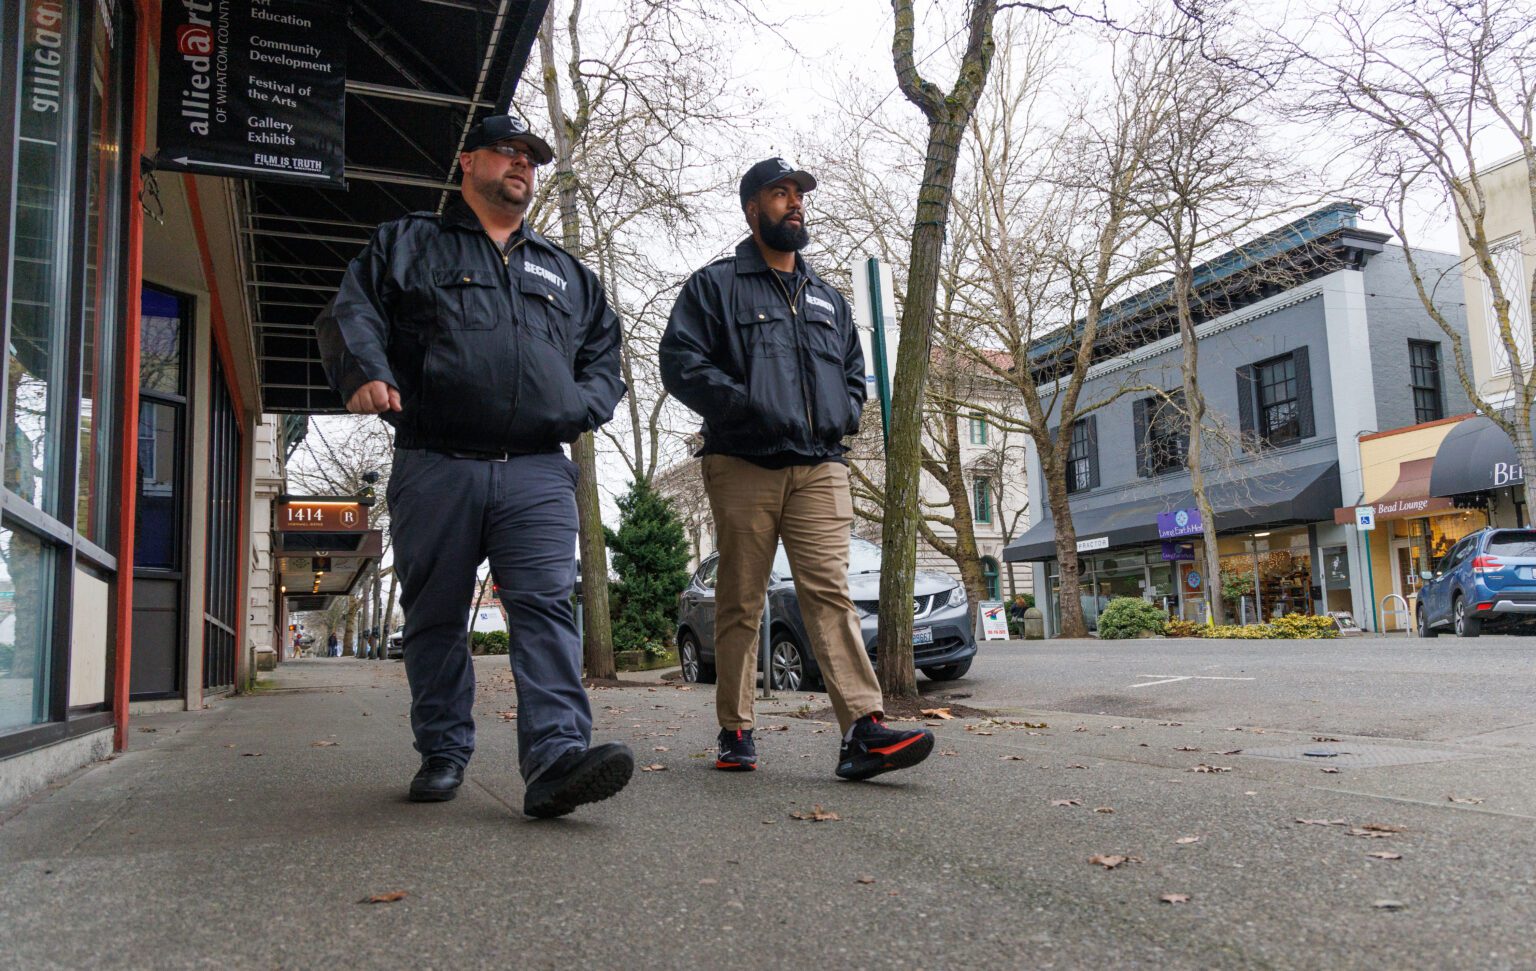 Chris Nelson, left, and Caleb Rodriguez from Risk Solutions Unlimited patrol downtown Bellingham on Feb. 2. Bellingham contracted with the security company to provide 24/7 service.